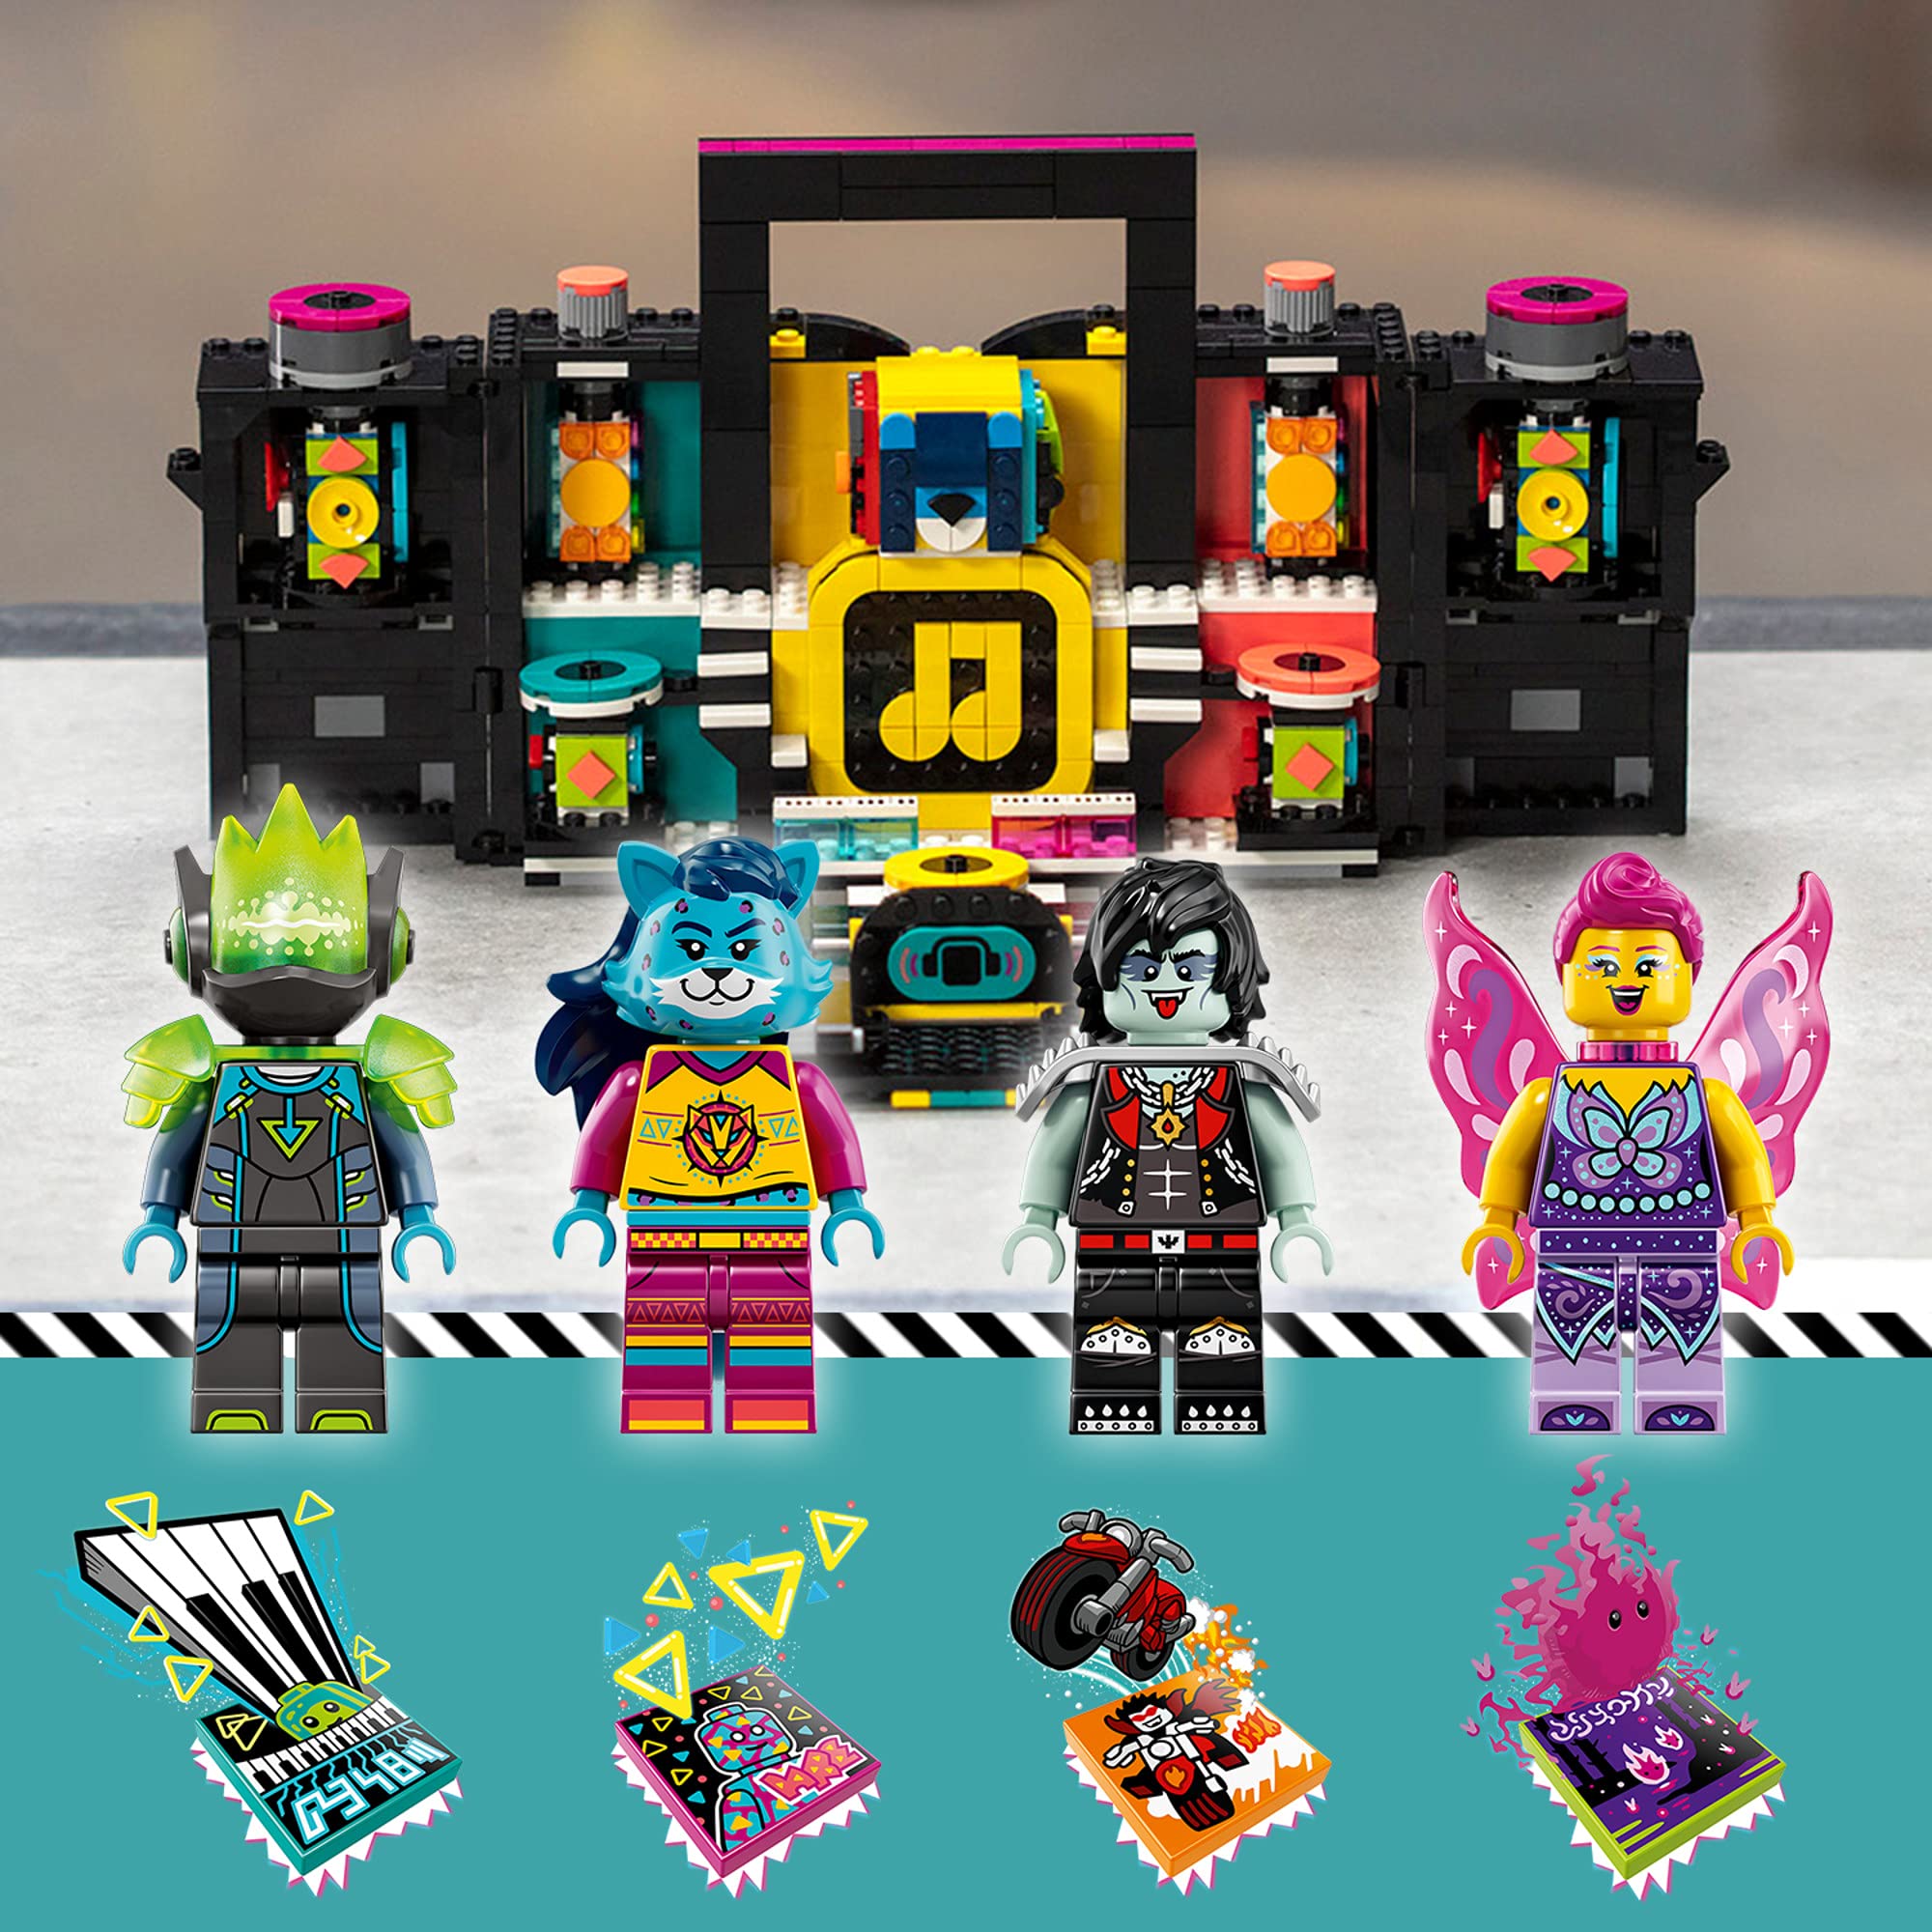 LEGO VIDIYO The Boombox 43115 Building Kit Toy; Inspire Kids to Direct and Star in Their Own Music Videos; New 2021 (996 Pieces)